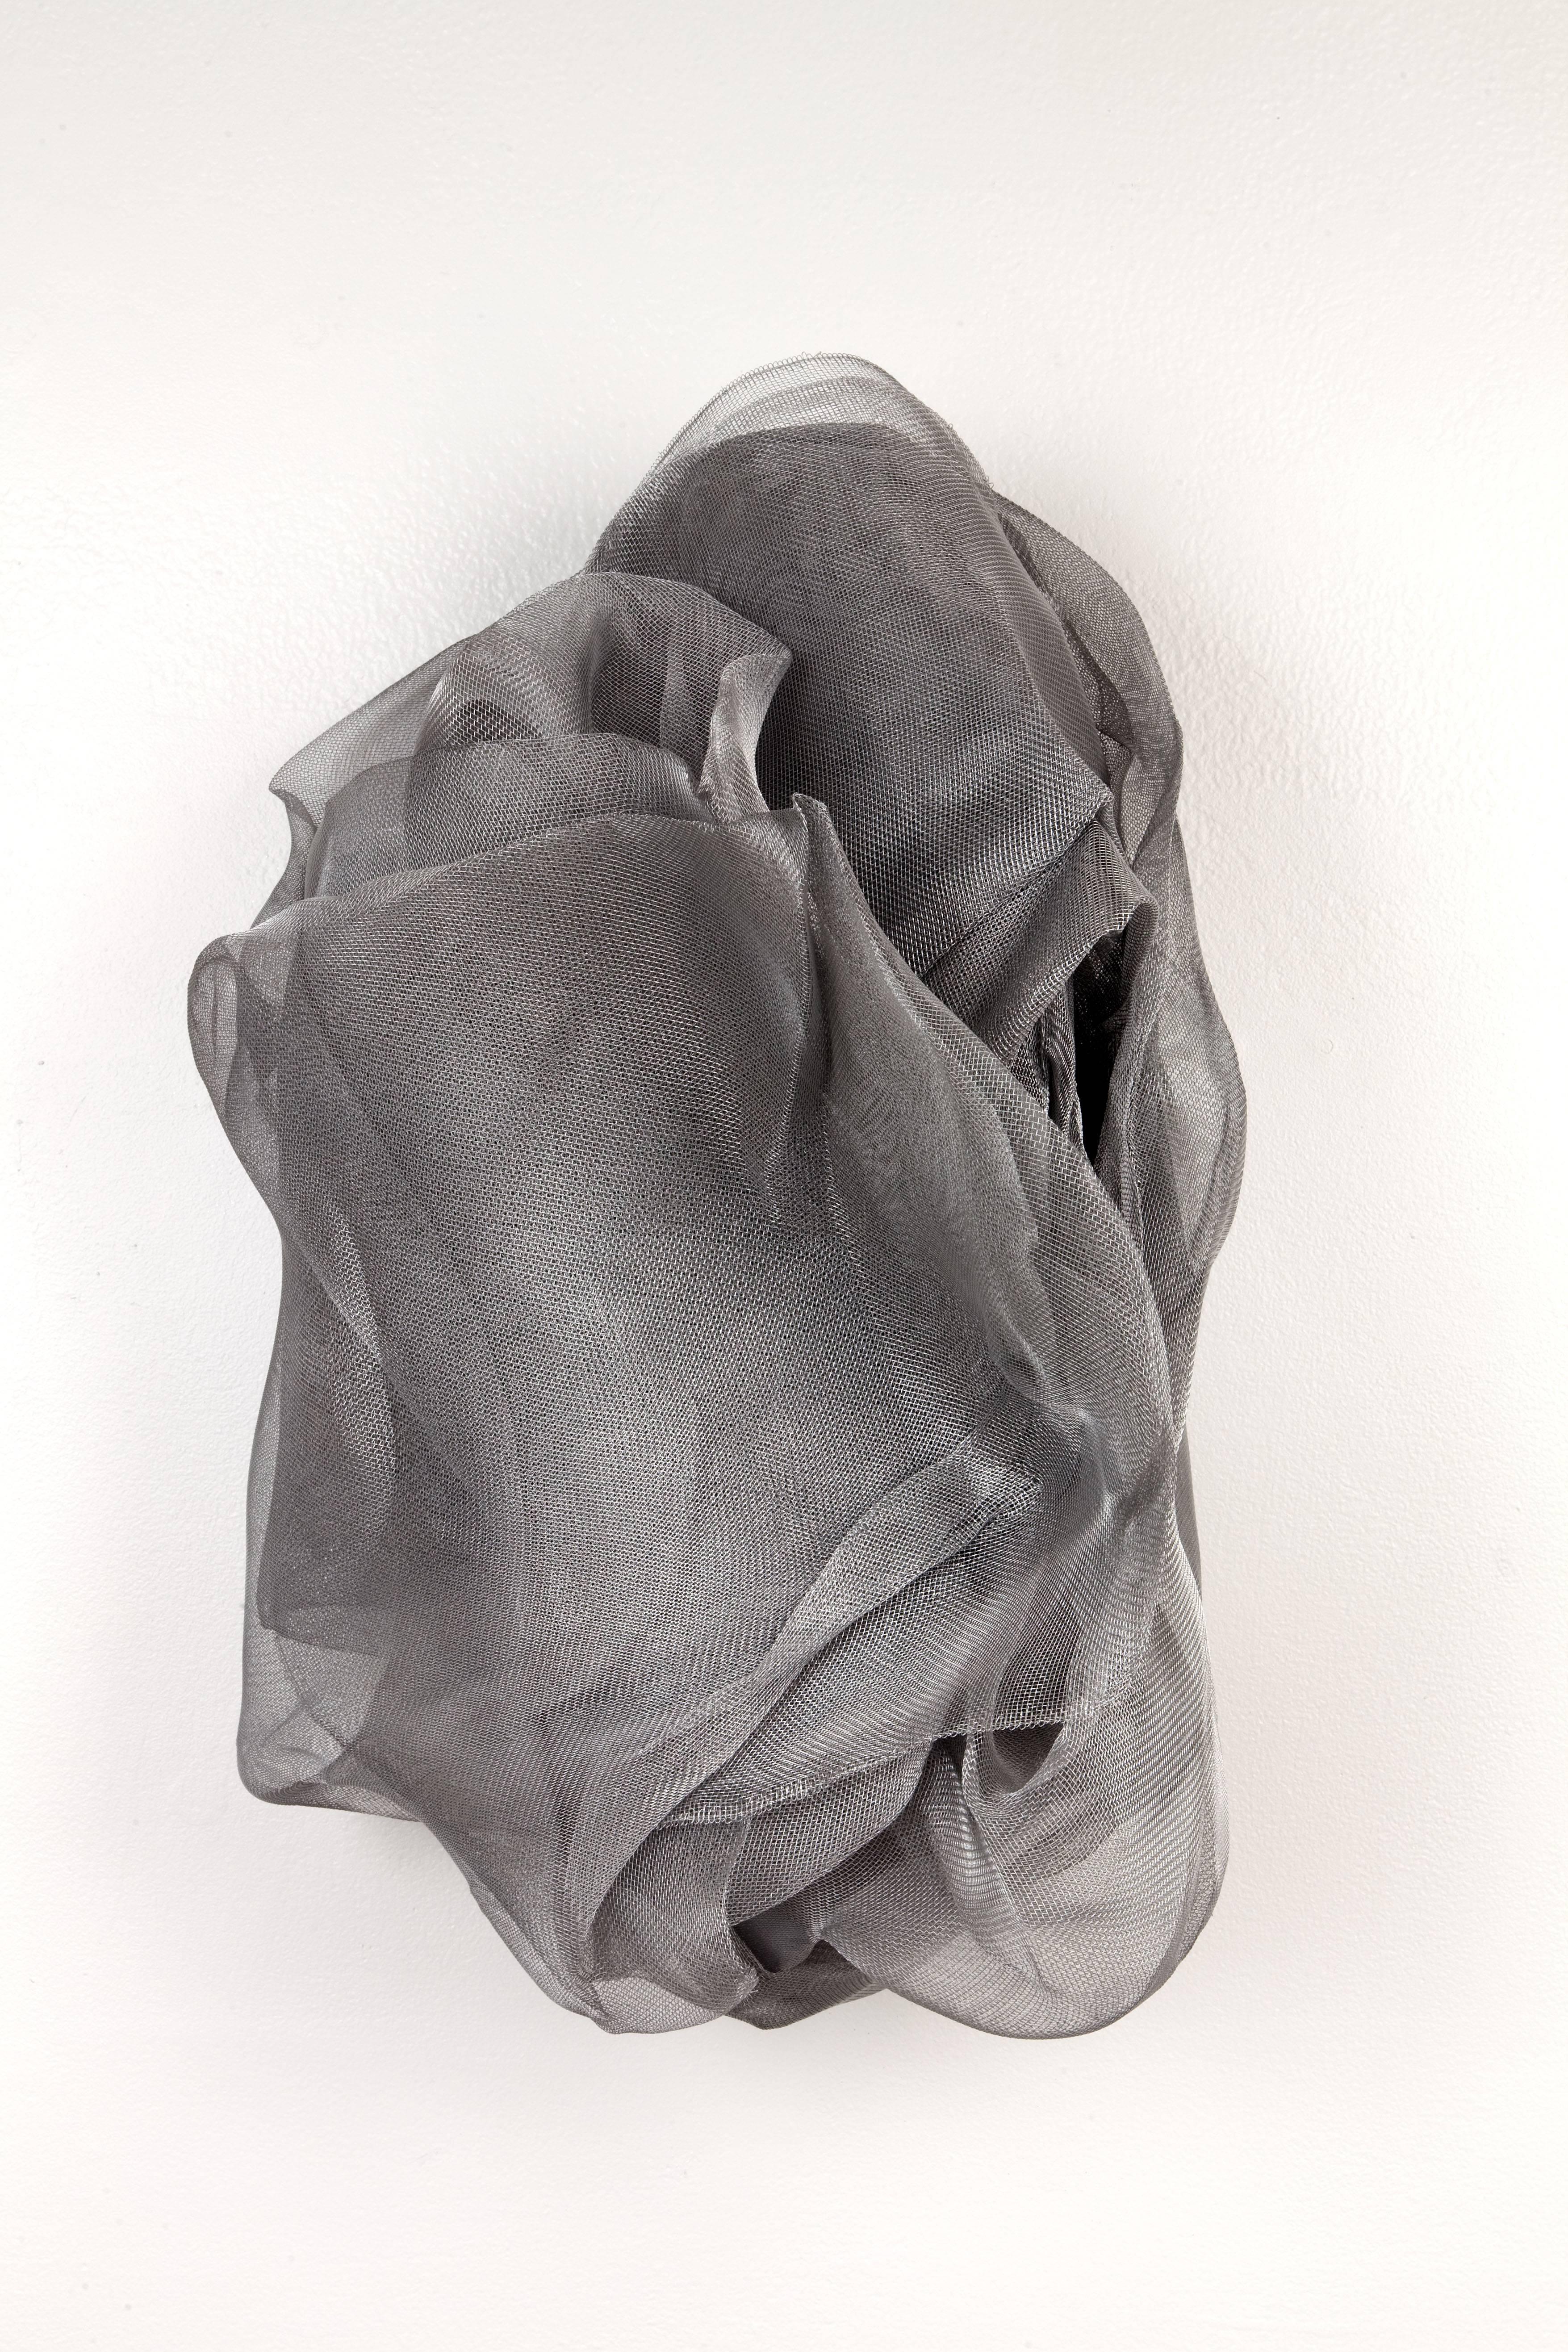 Sidonie Villere Abstract Sculpture - Wrapped Series V